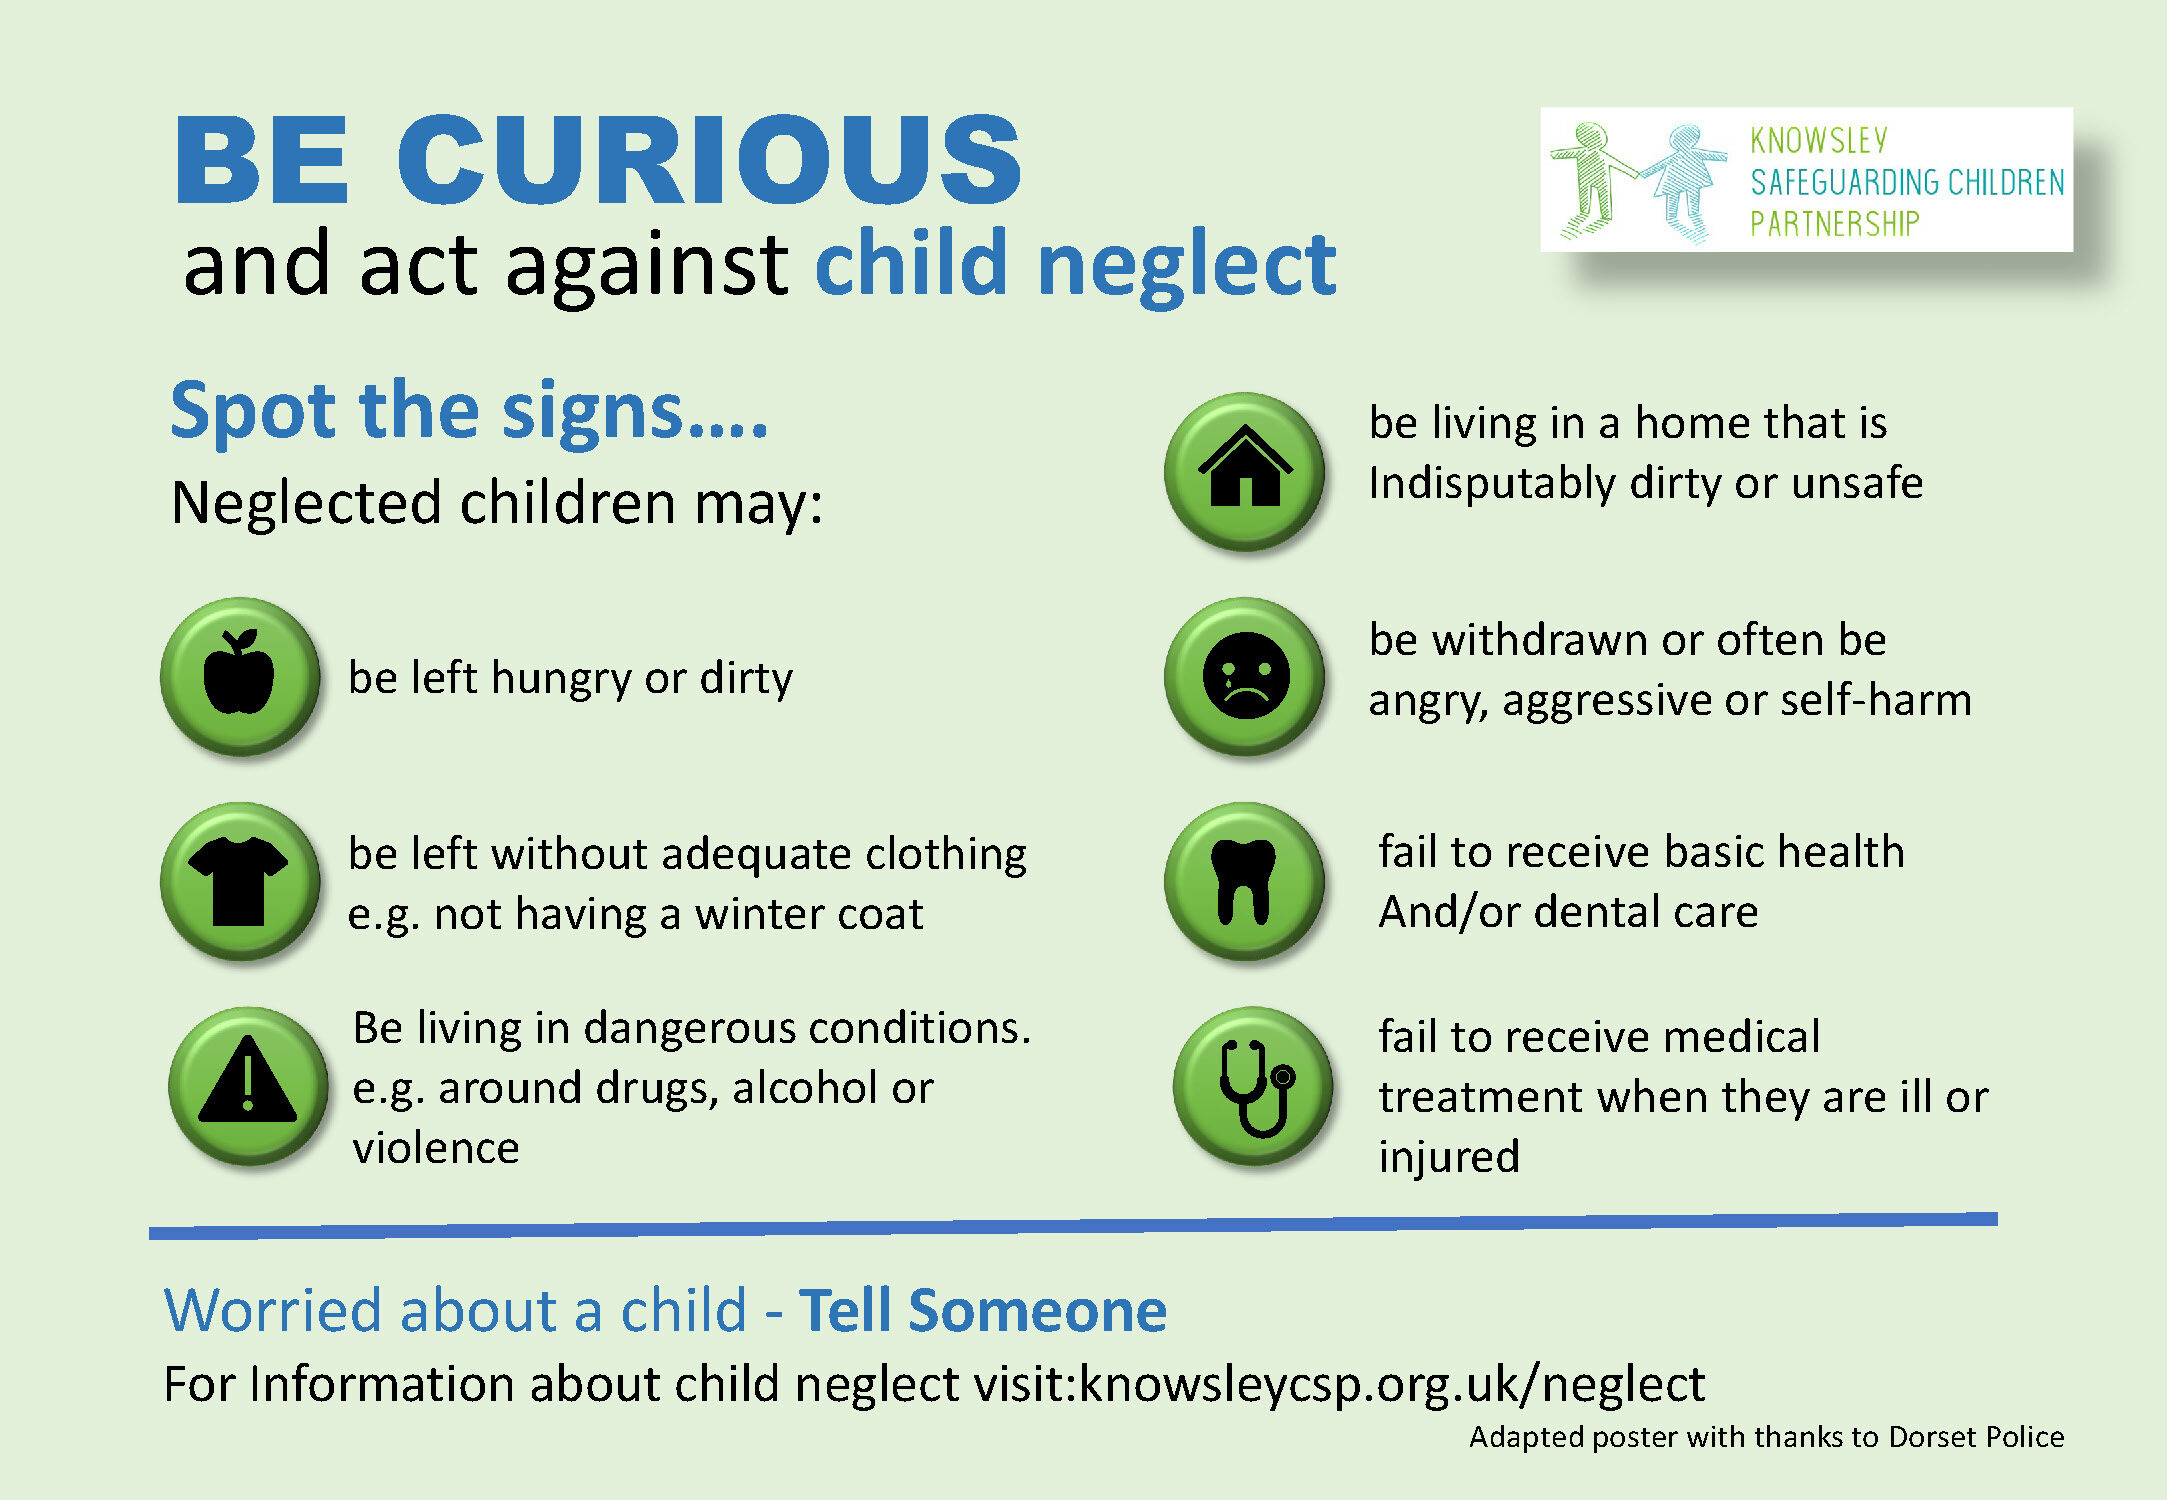 child abuse and neglect case study